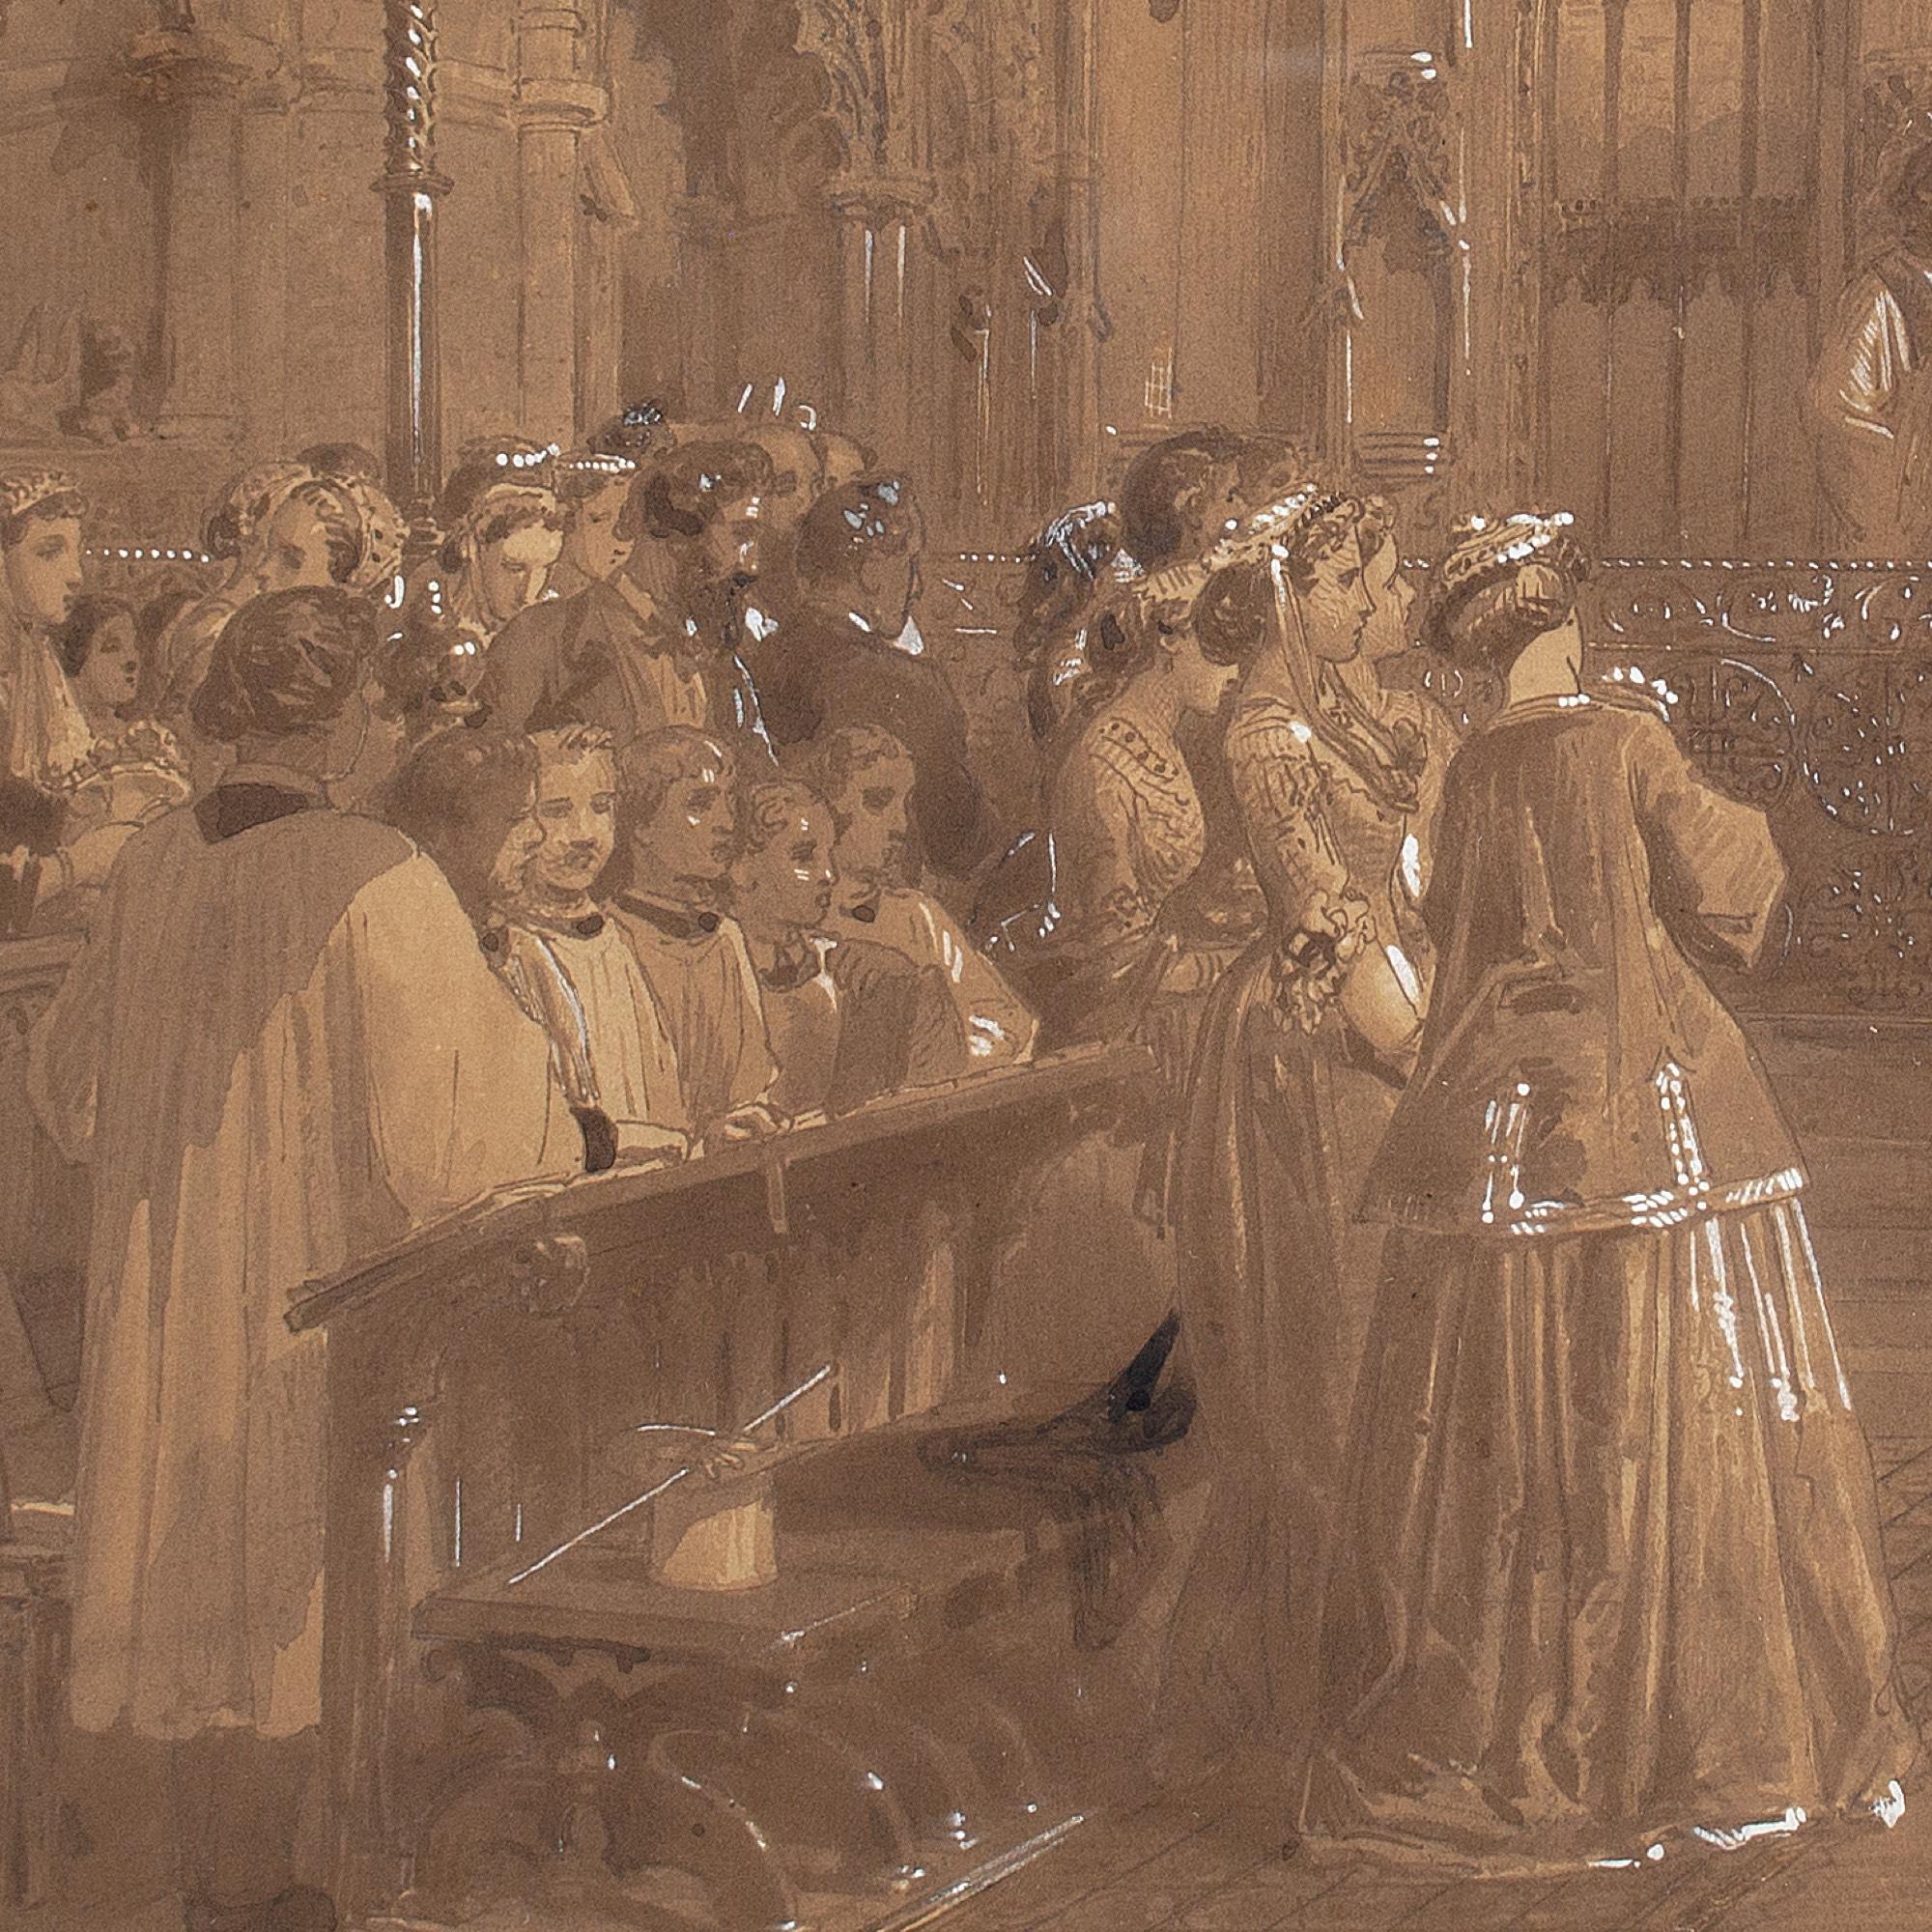 Edward Henry Corbould, Westminster Abbey, The Wedding 8